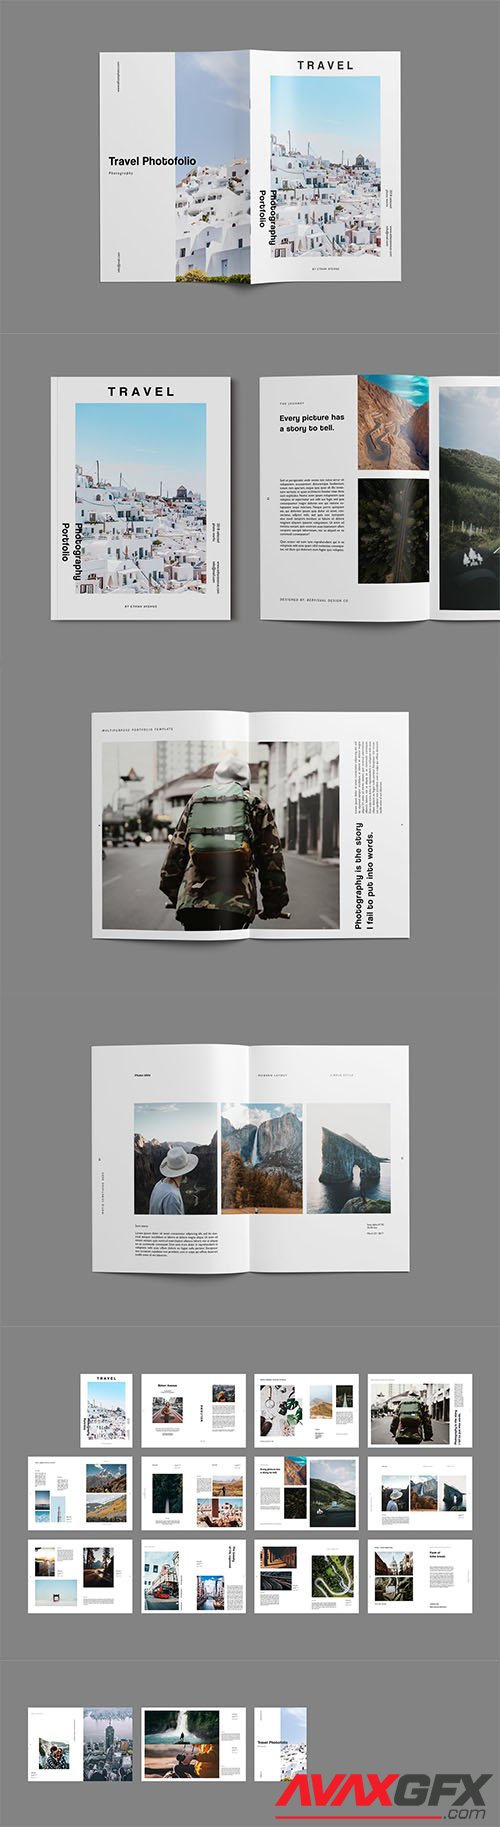 Travel Photography Brochure Template